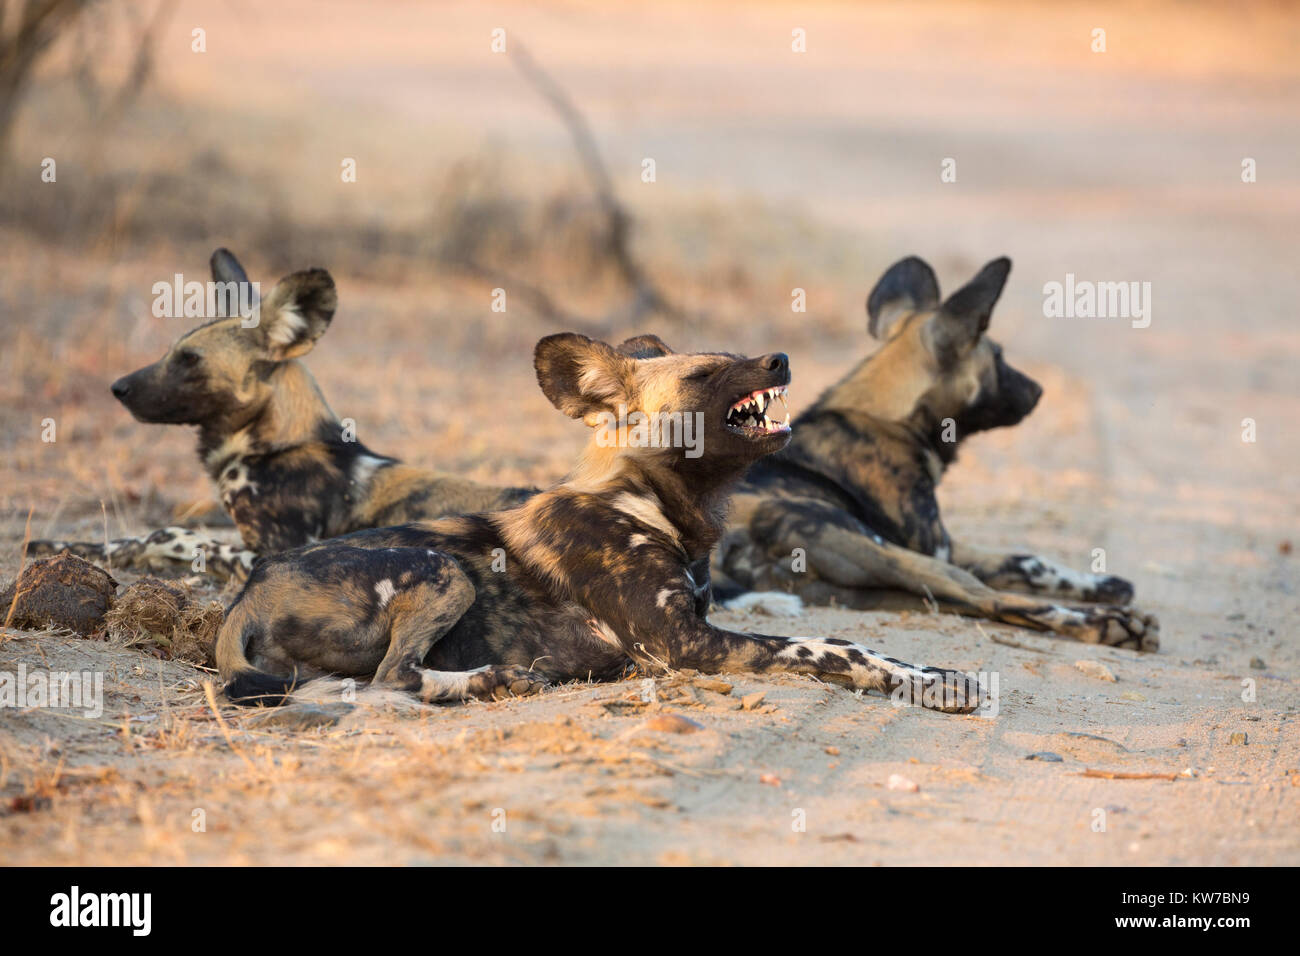 African wild dog (Lycaon pictus) a riposo, il parco nazionale Kruger, Sud Africa, Settembre 2016 Foto Stock